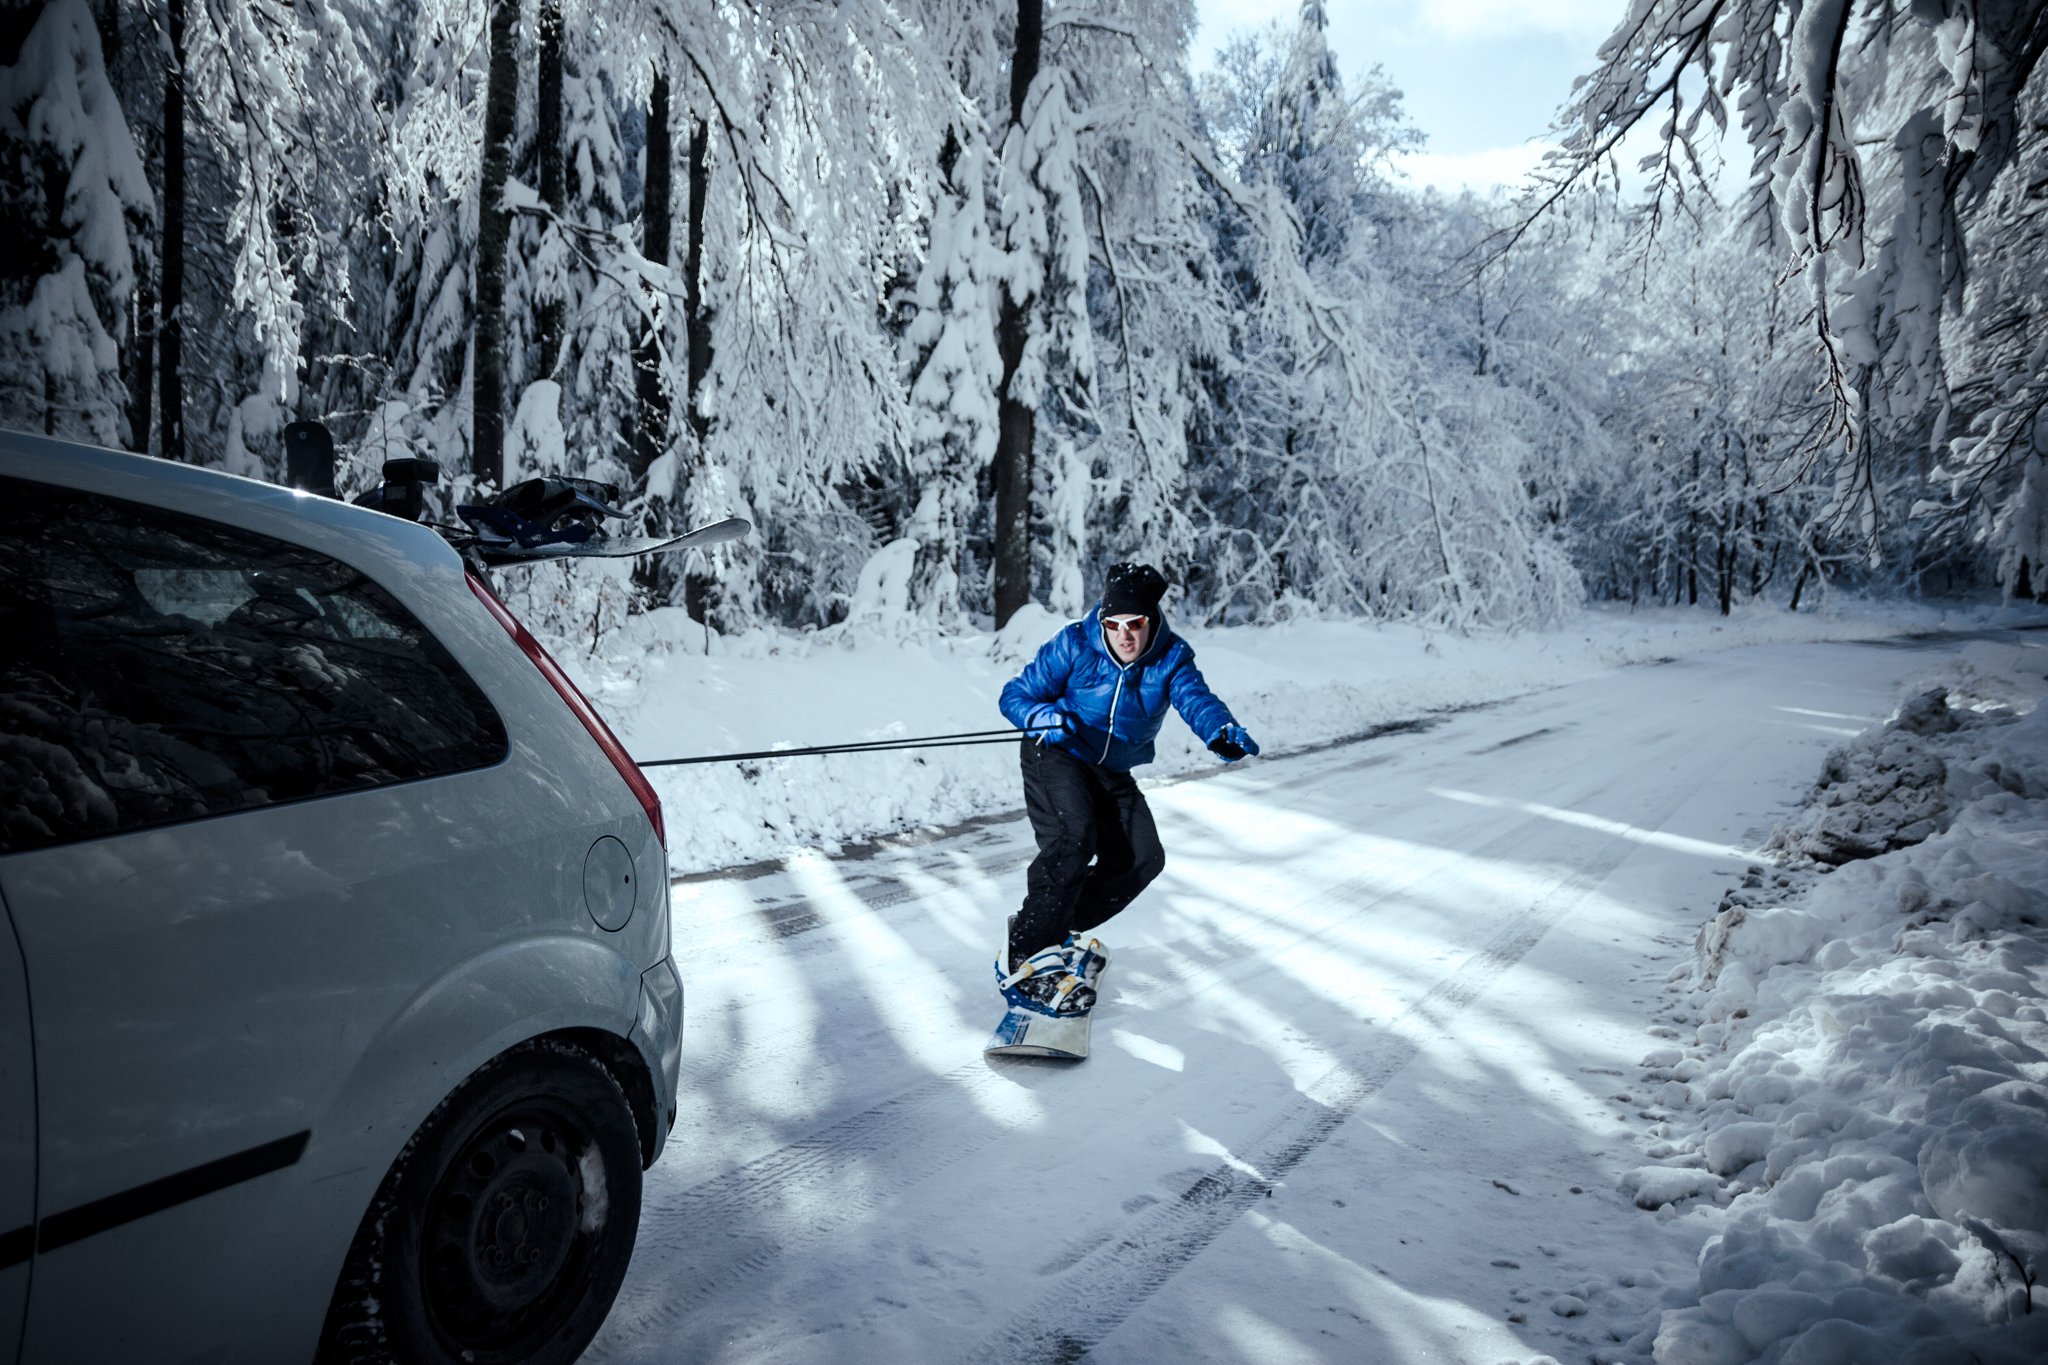 serbia. goc, winter, snow, white, road, mountain, frozen, cold, snowboard, follow, car, towed, rope, board, sliding, action, sport, recreation, extreme, behind, speed, winter scene, outdoor, one, person, fearless,, Марко Радовановић